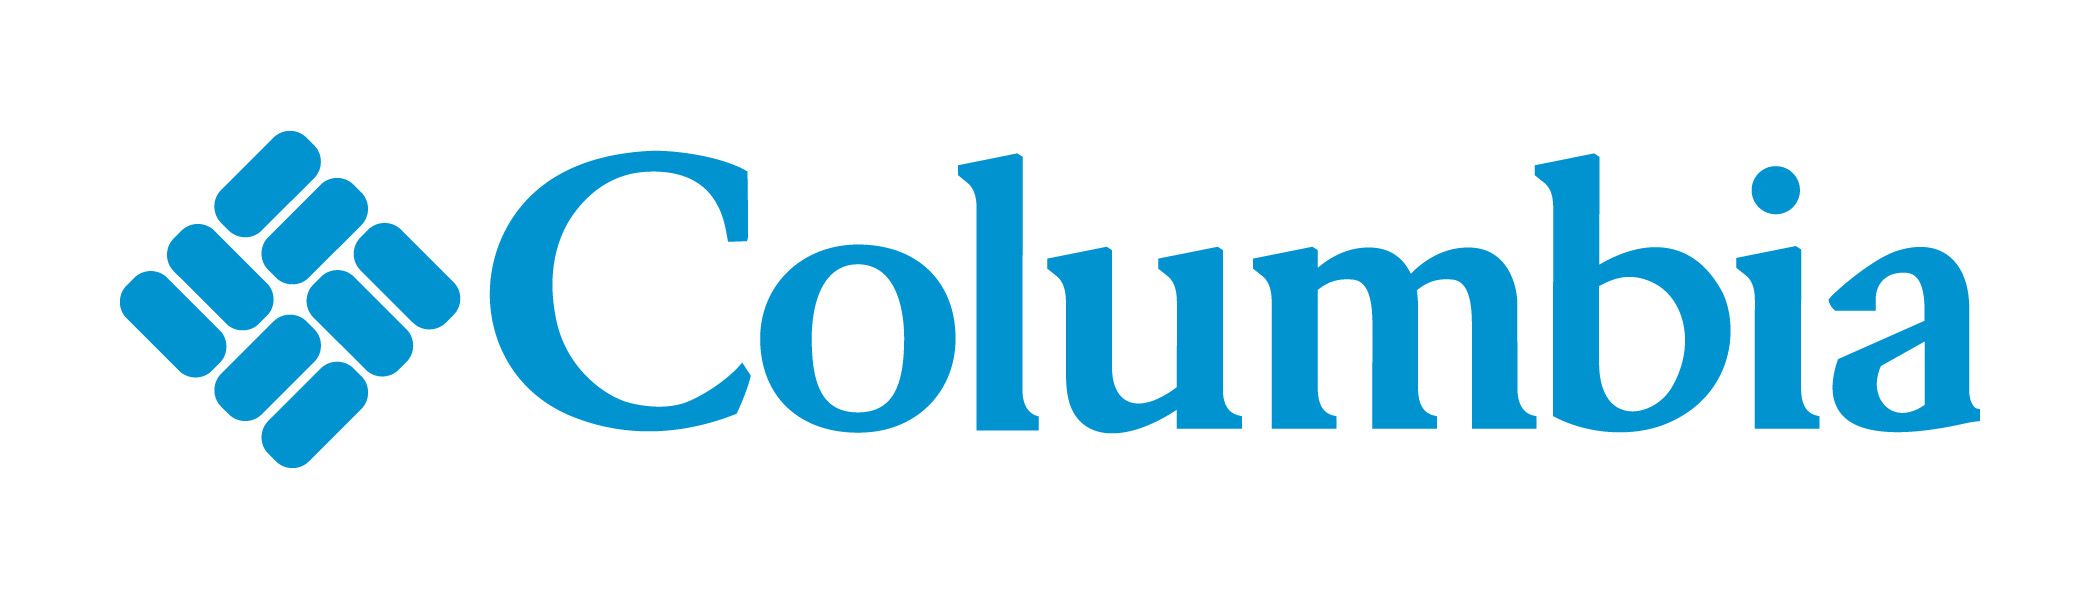 Columbia Coupons and Promo Codes to Save BIG on your Next Purchase!